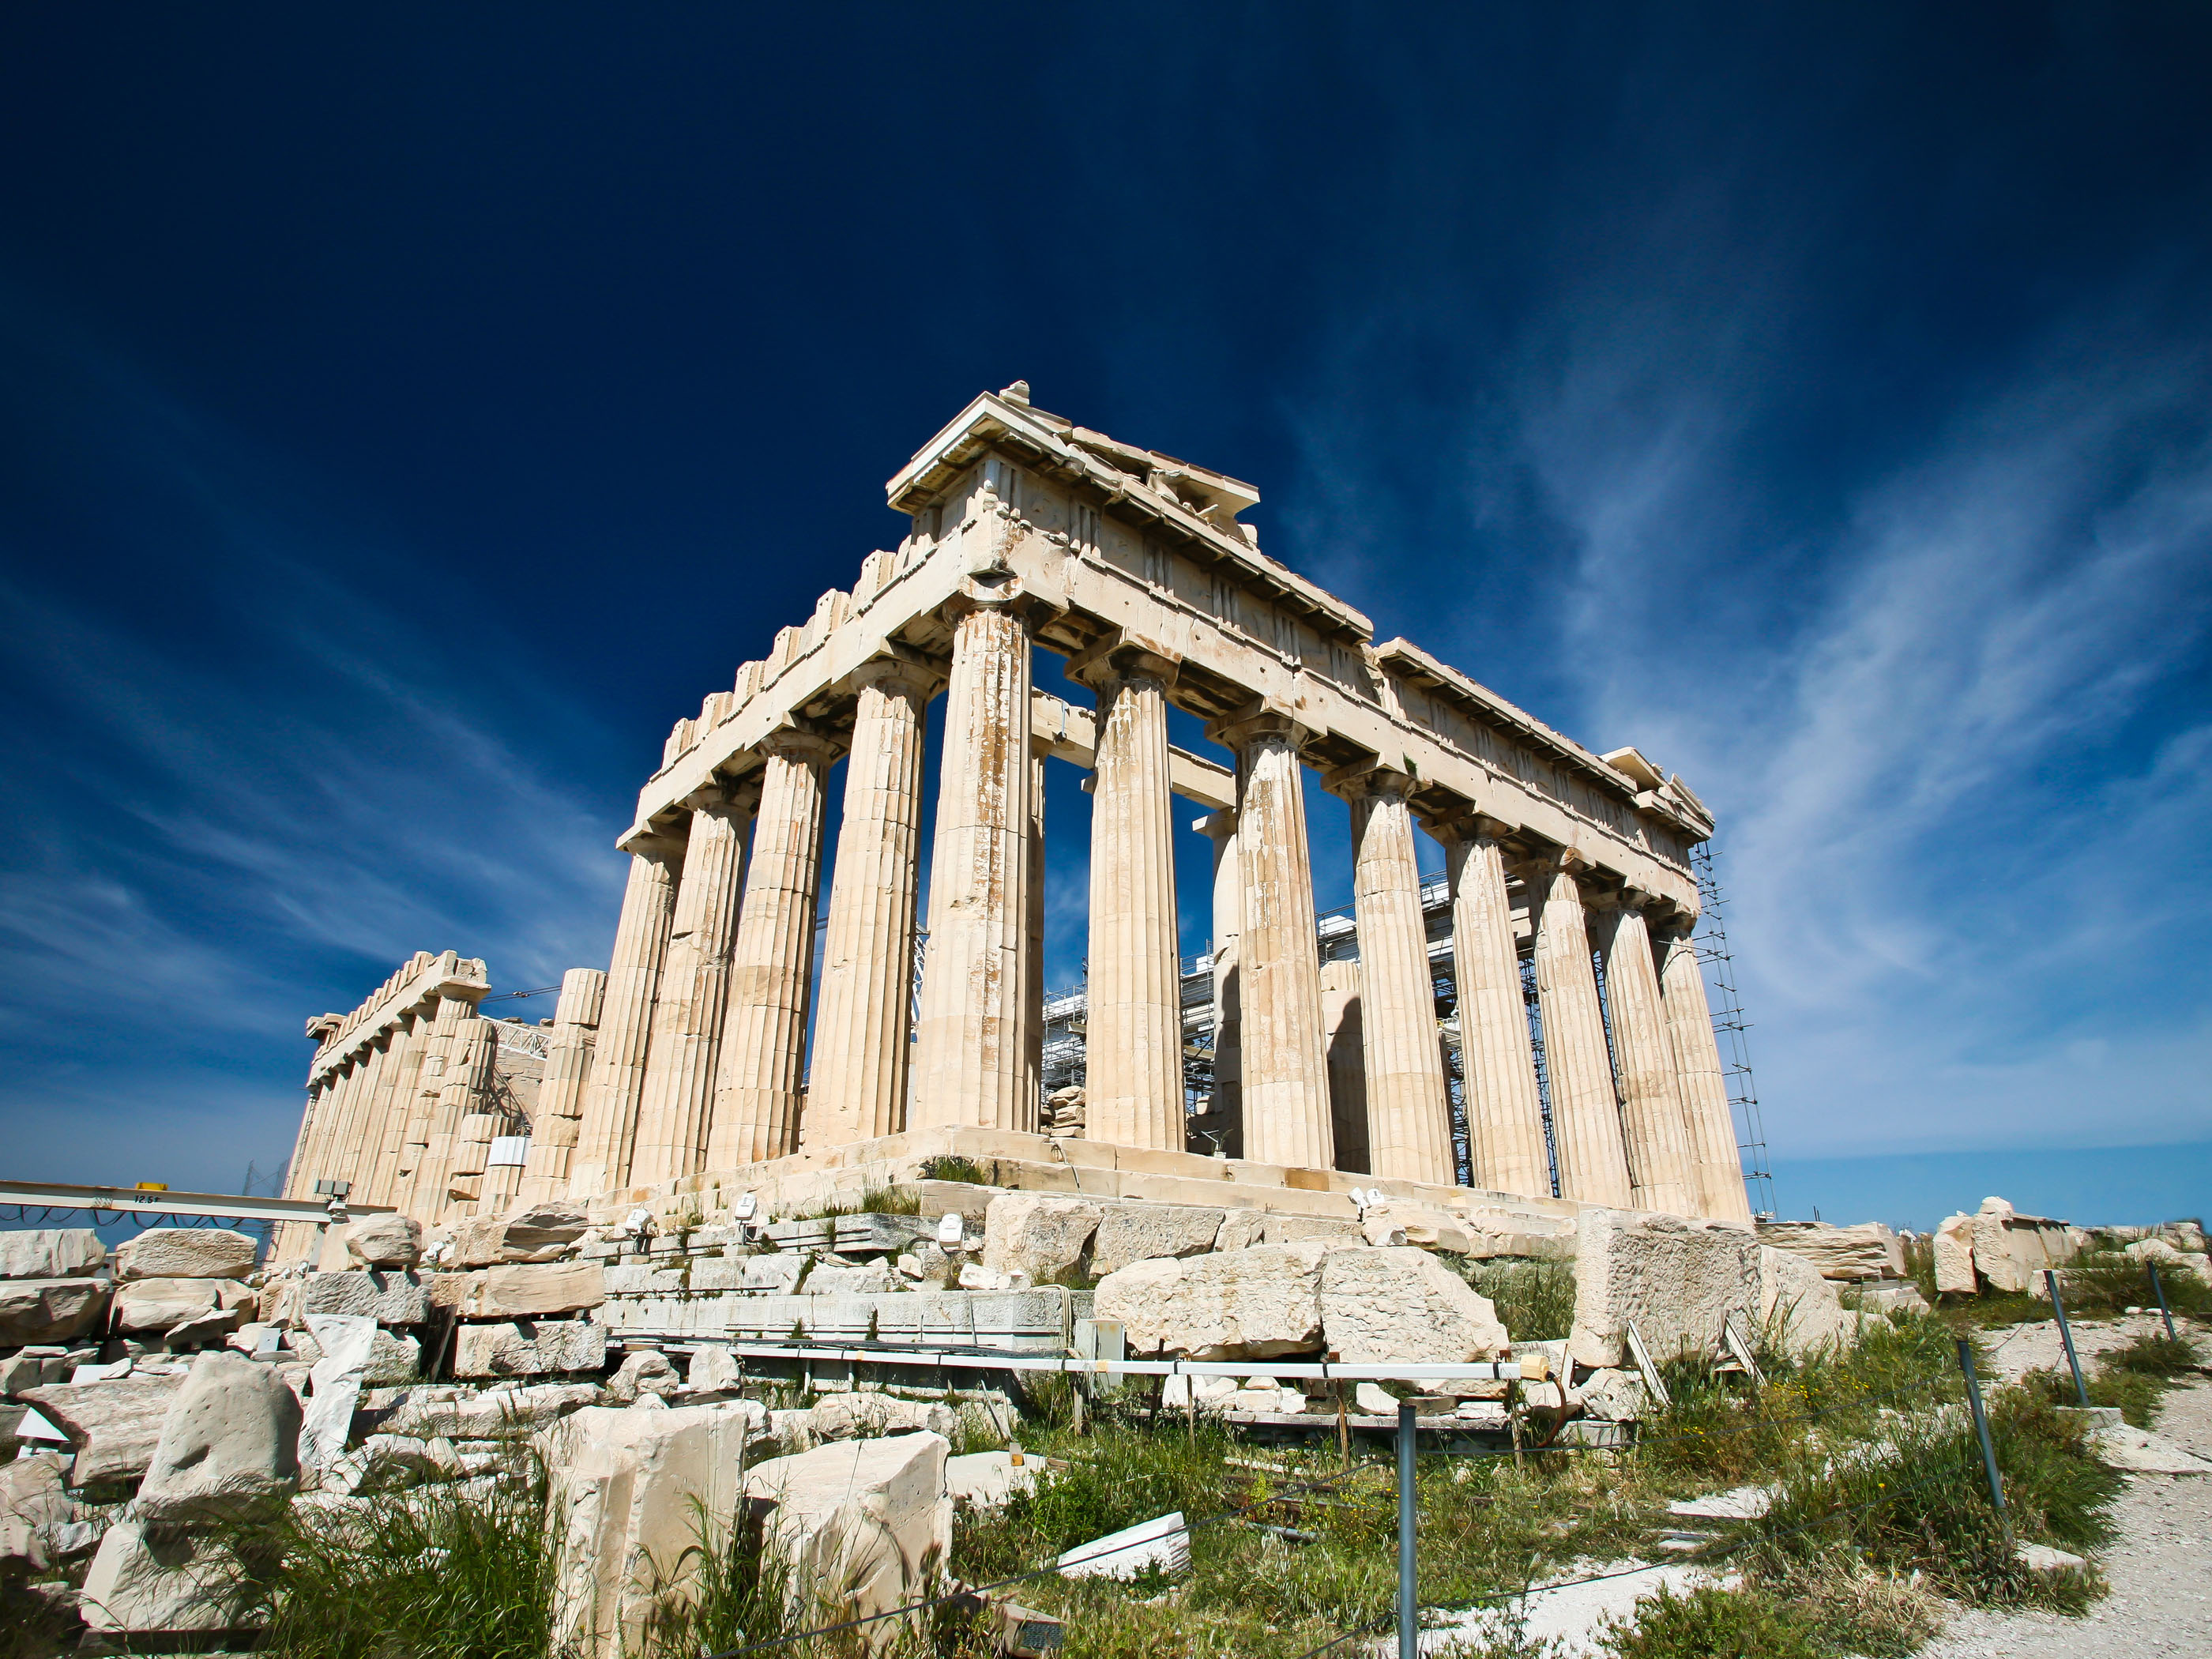 Nice Images Collection: Acropolis Of Athens Desktop Wallpapers